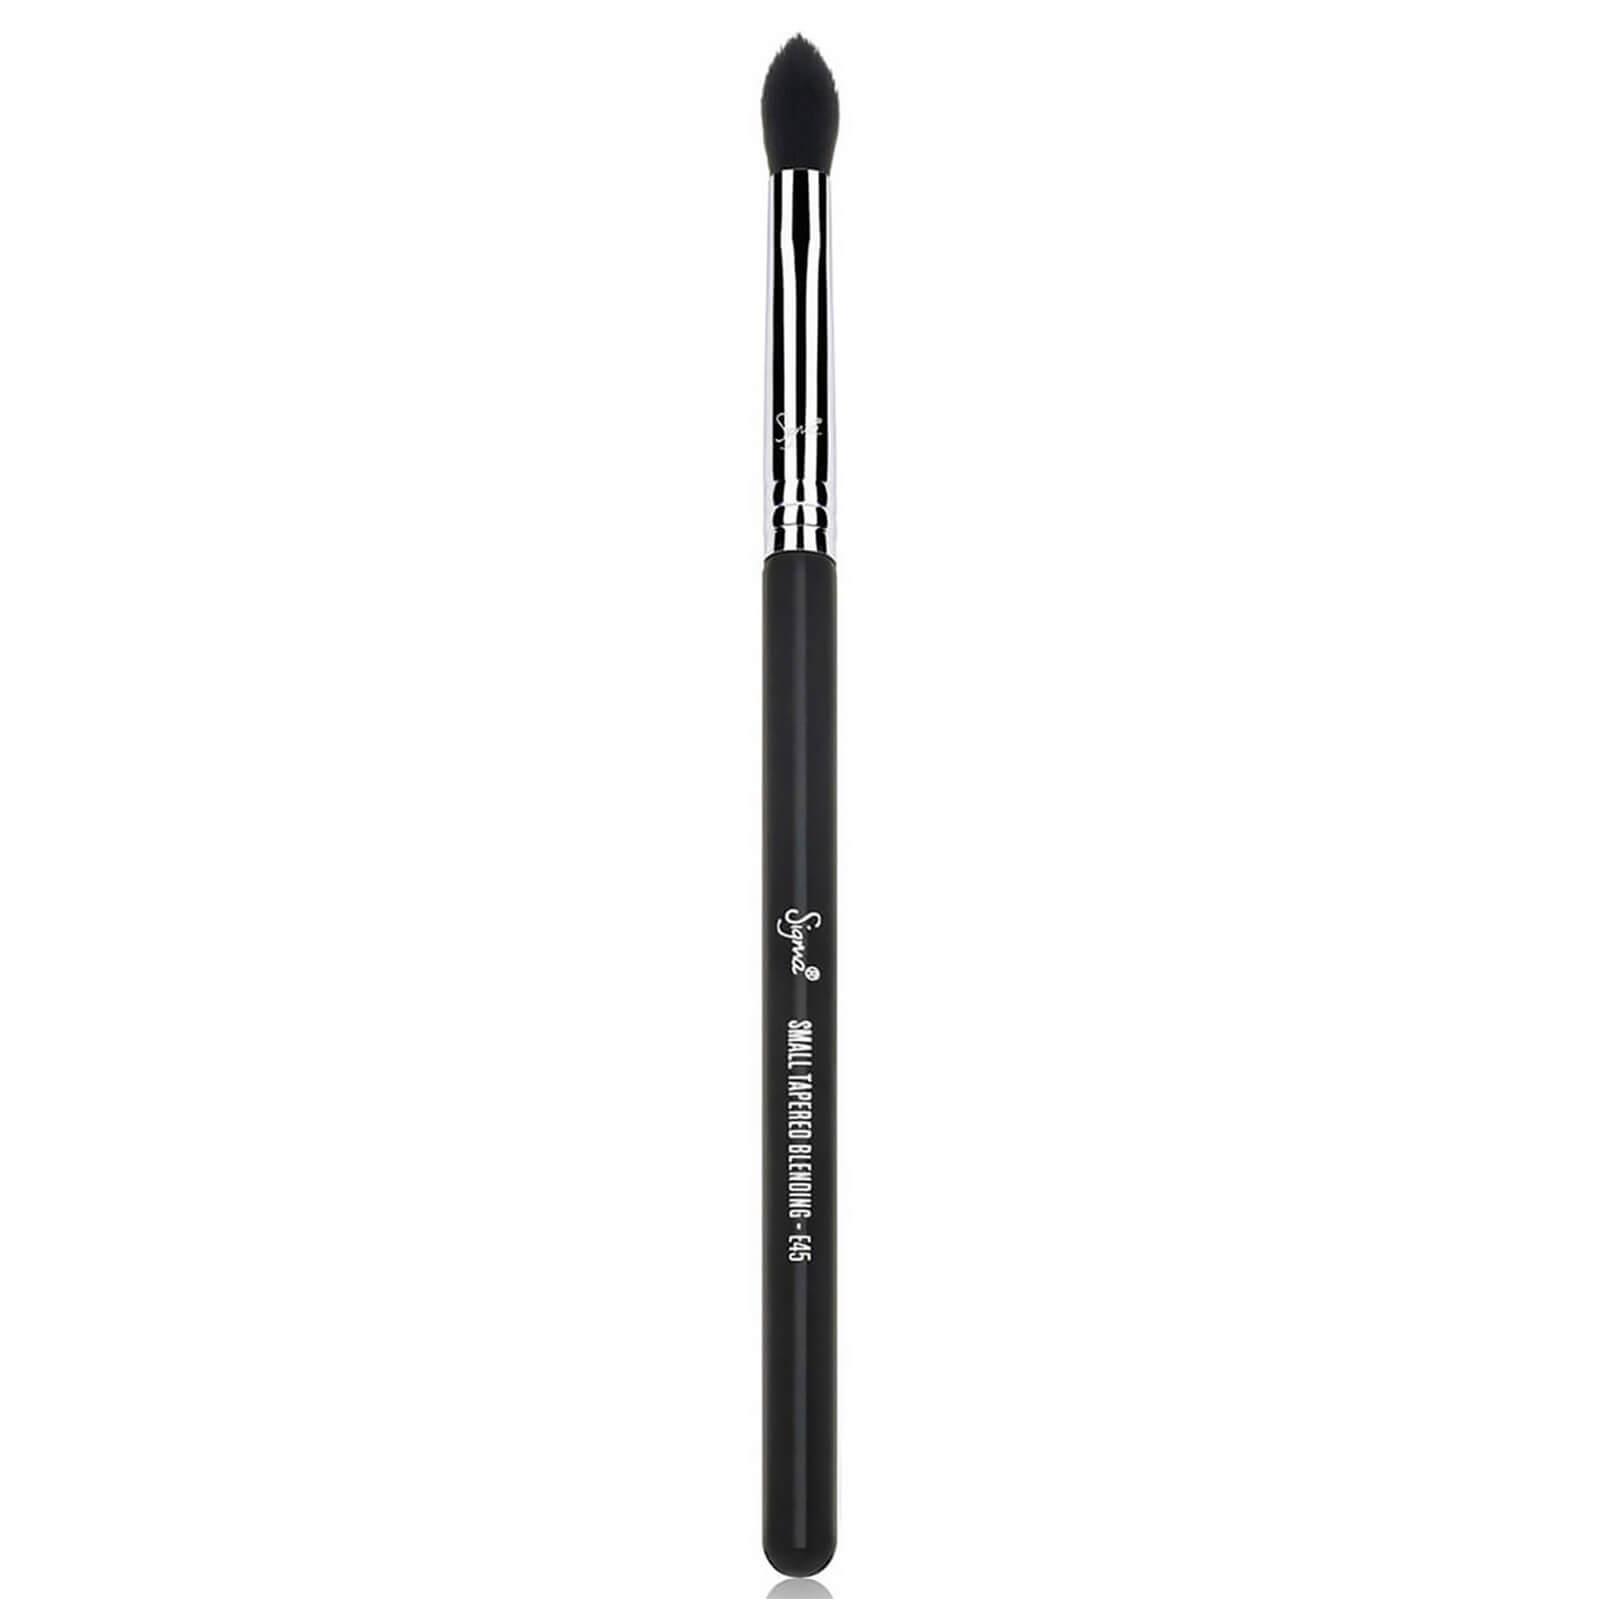 sigma beauty e45 - small tapered blendingÂ pinsel